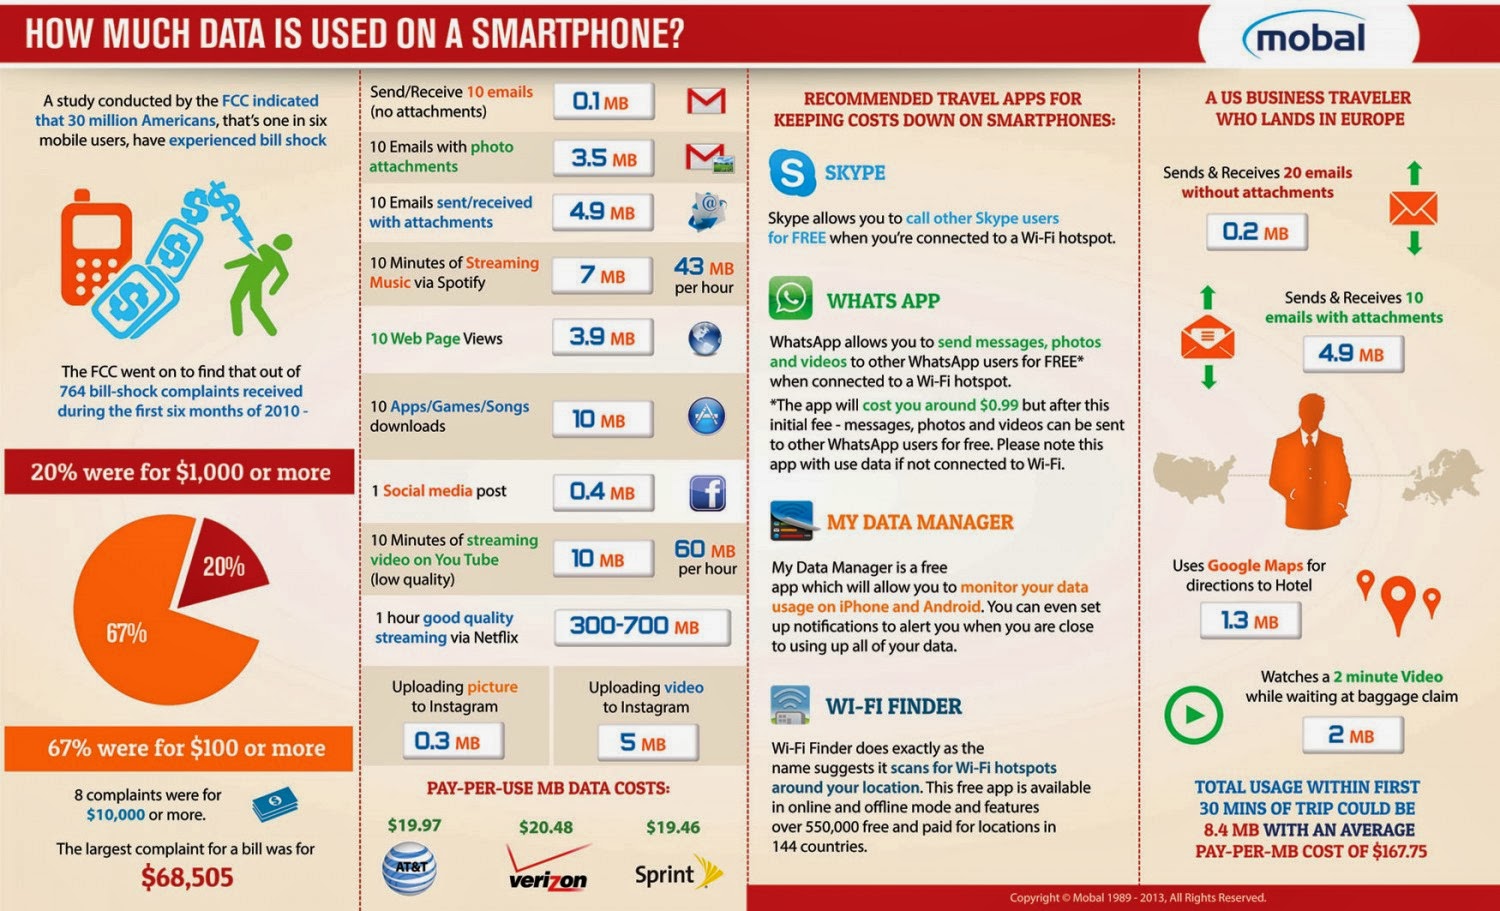 How much data is being used on a smartphone?